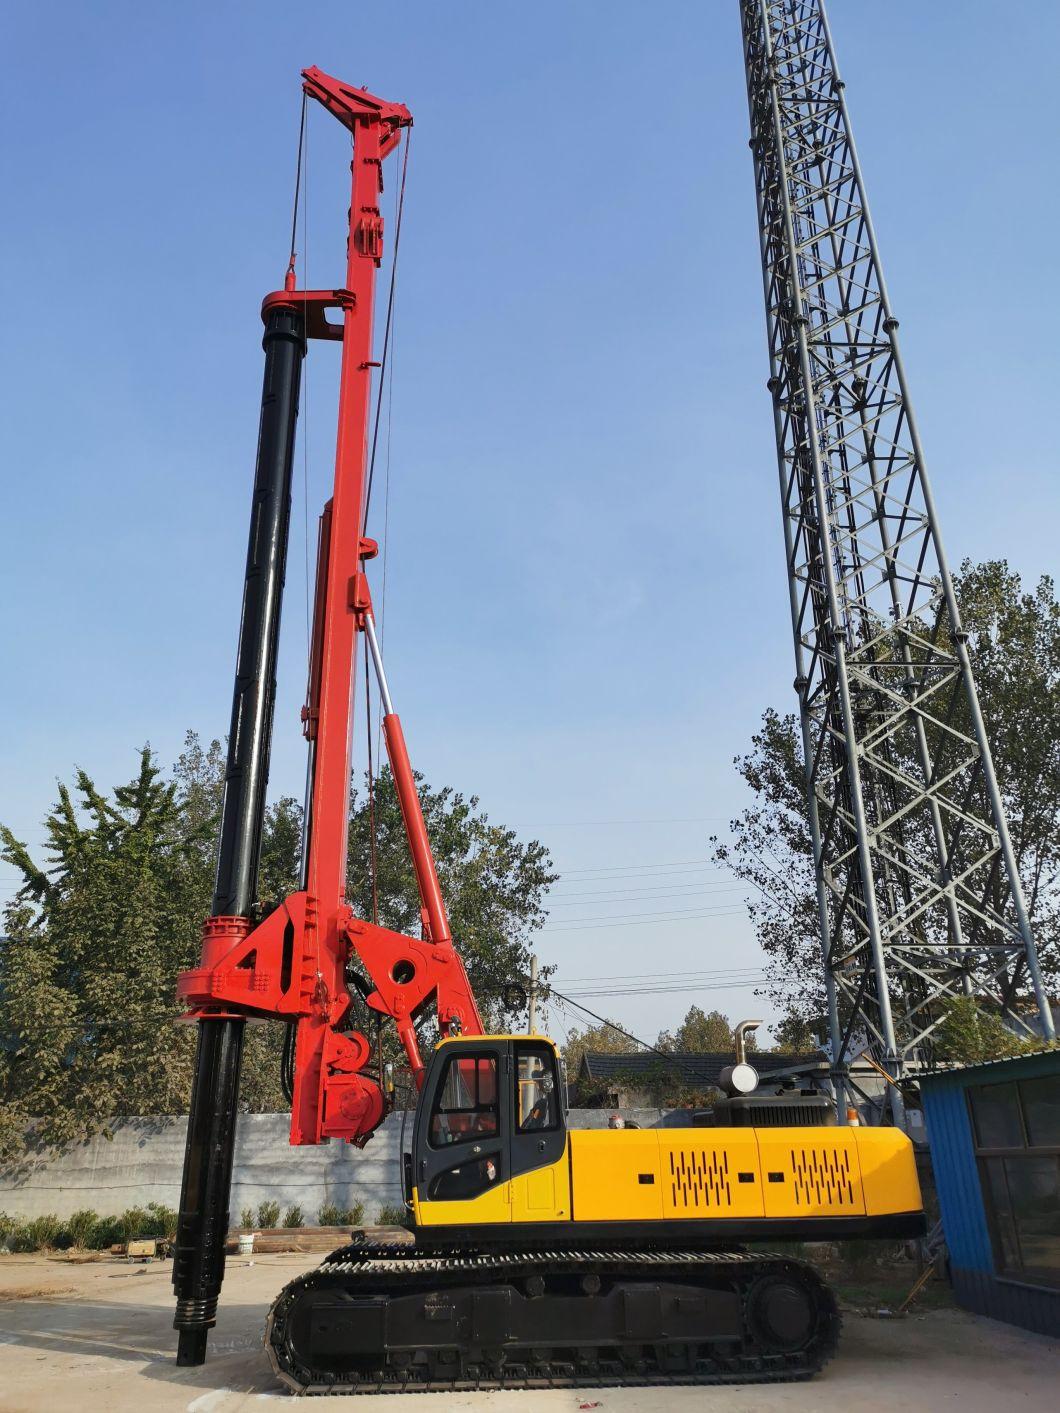 Pile Driver Mini Bore Well Pile Machine Used Piling Rig for Sale